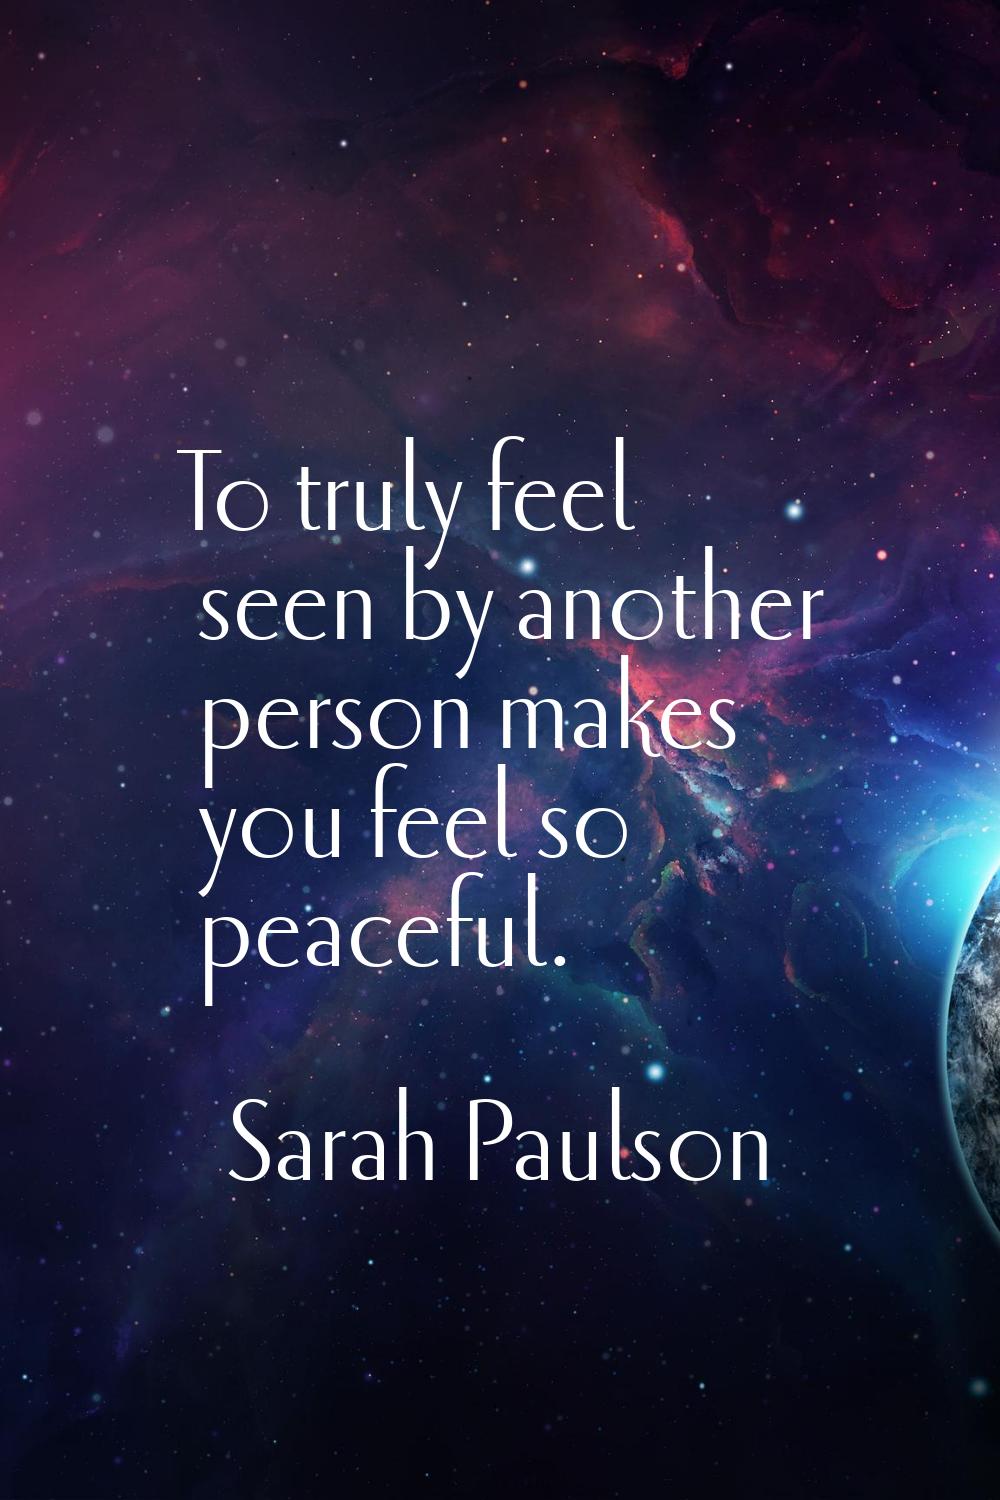 To truly feel seen by another person makes you feel so peaceful.